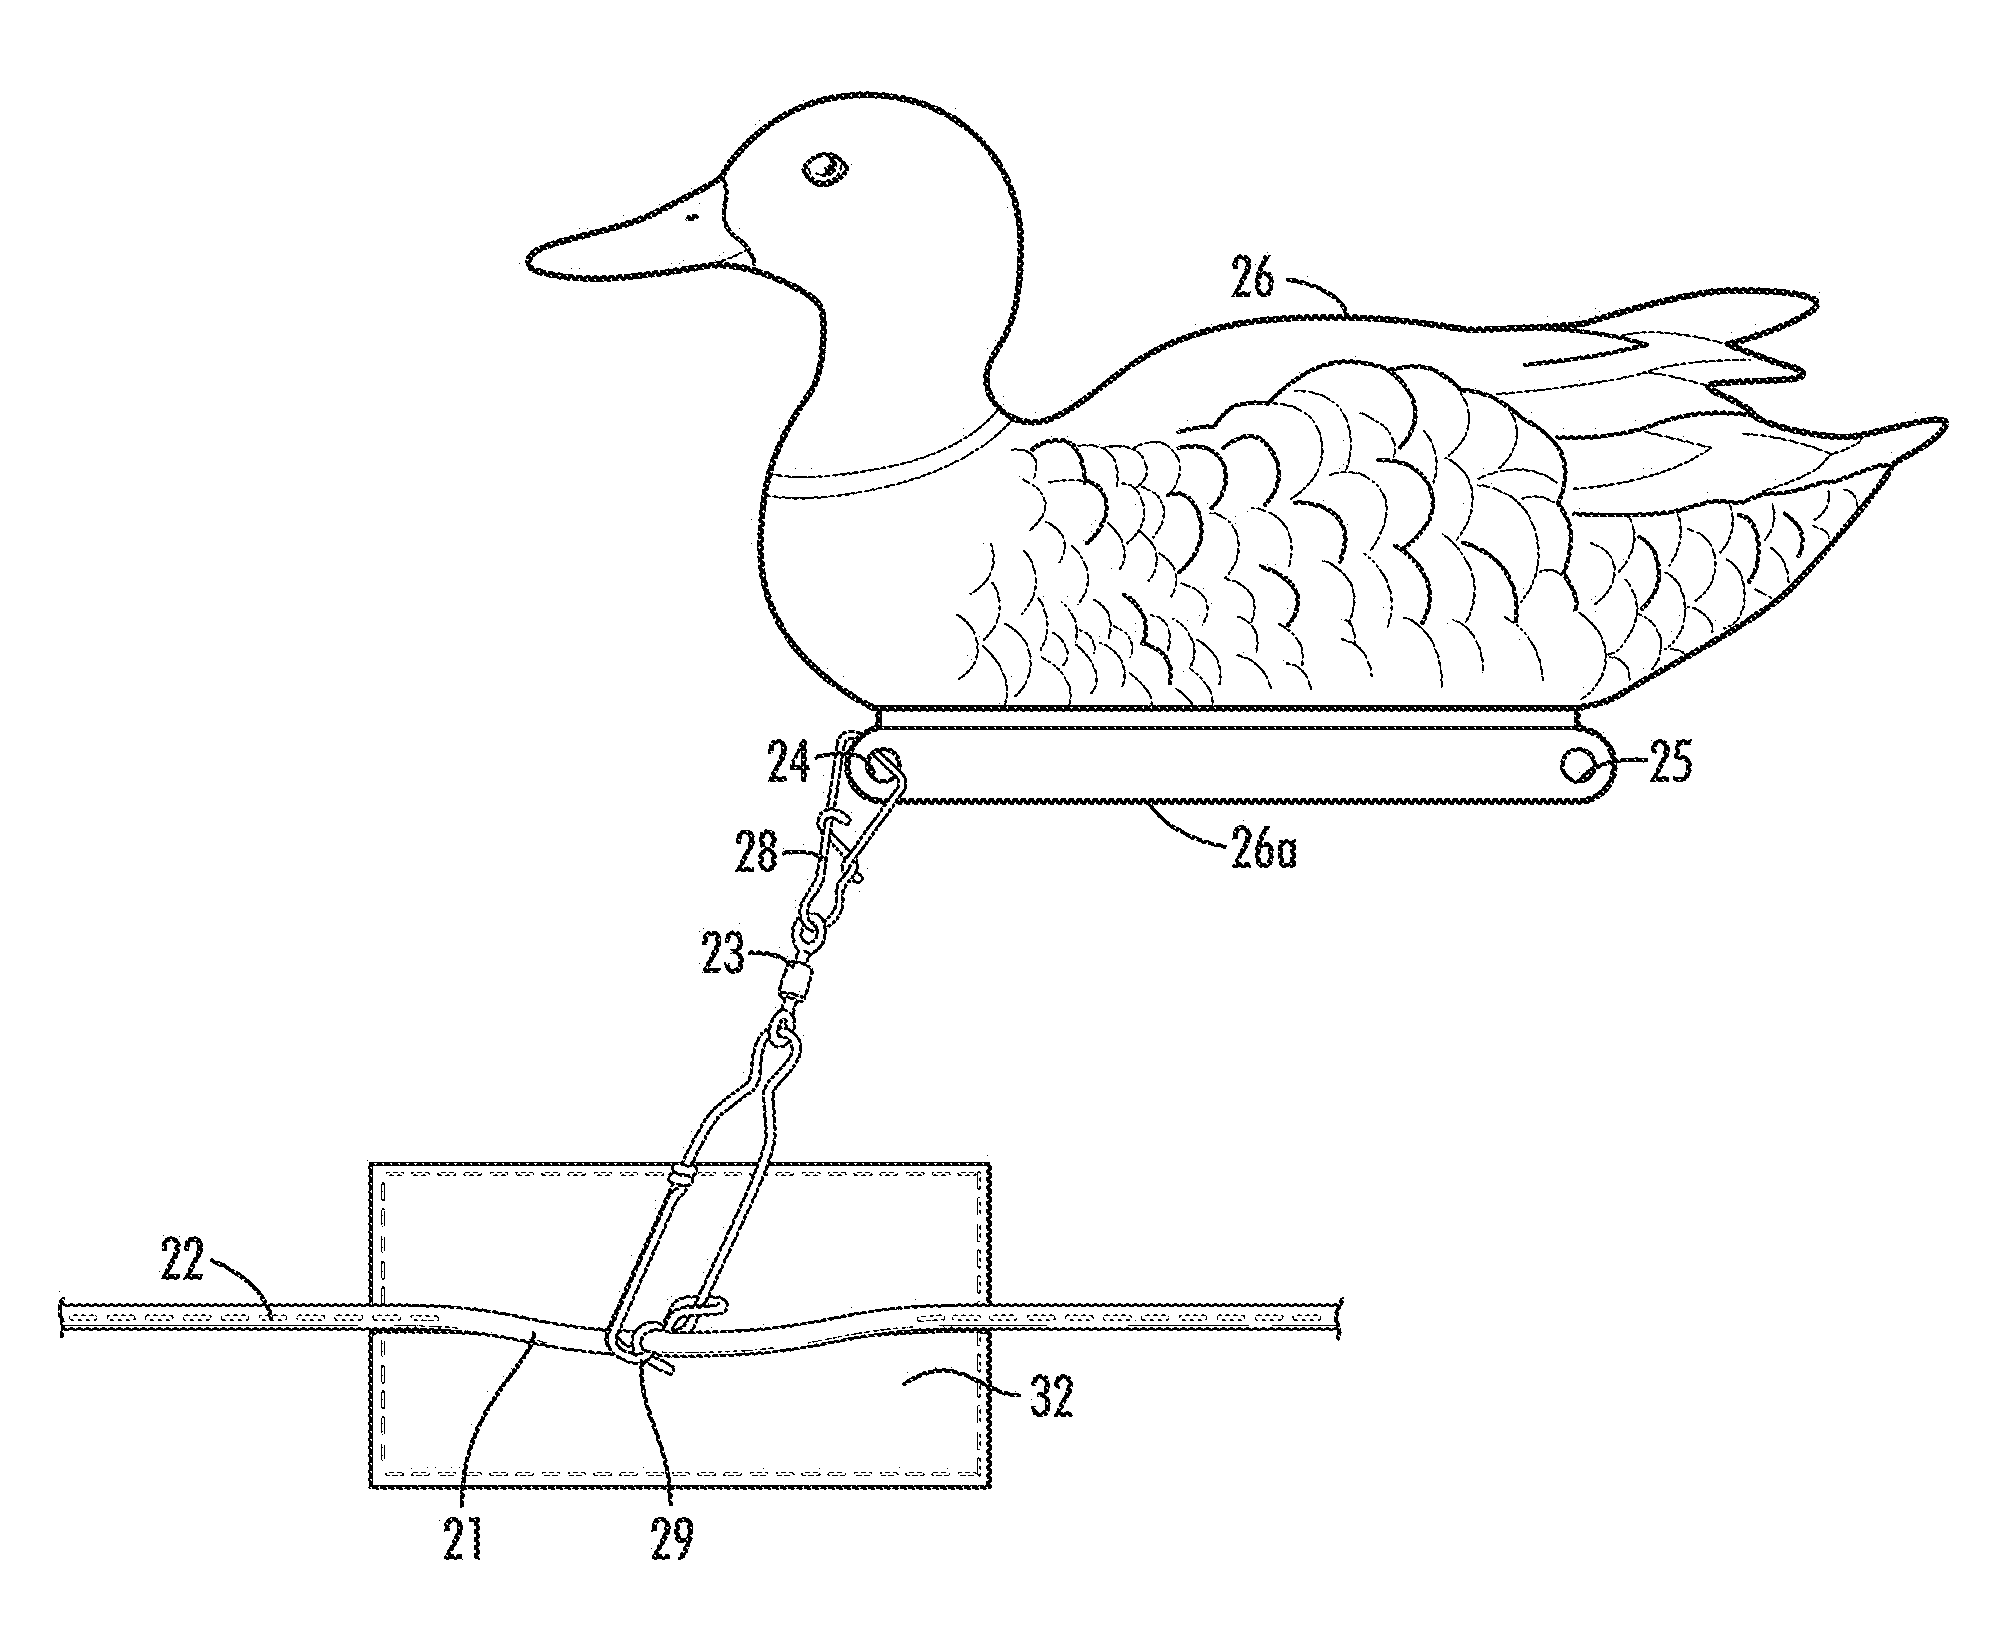 Apparatuses and methods for attracting and/or repelling animals